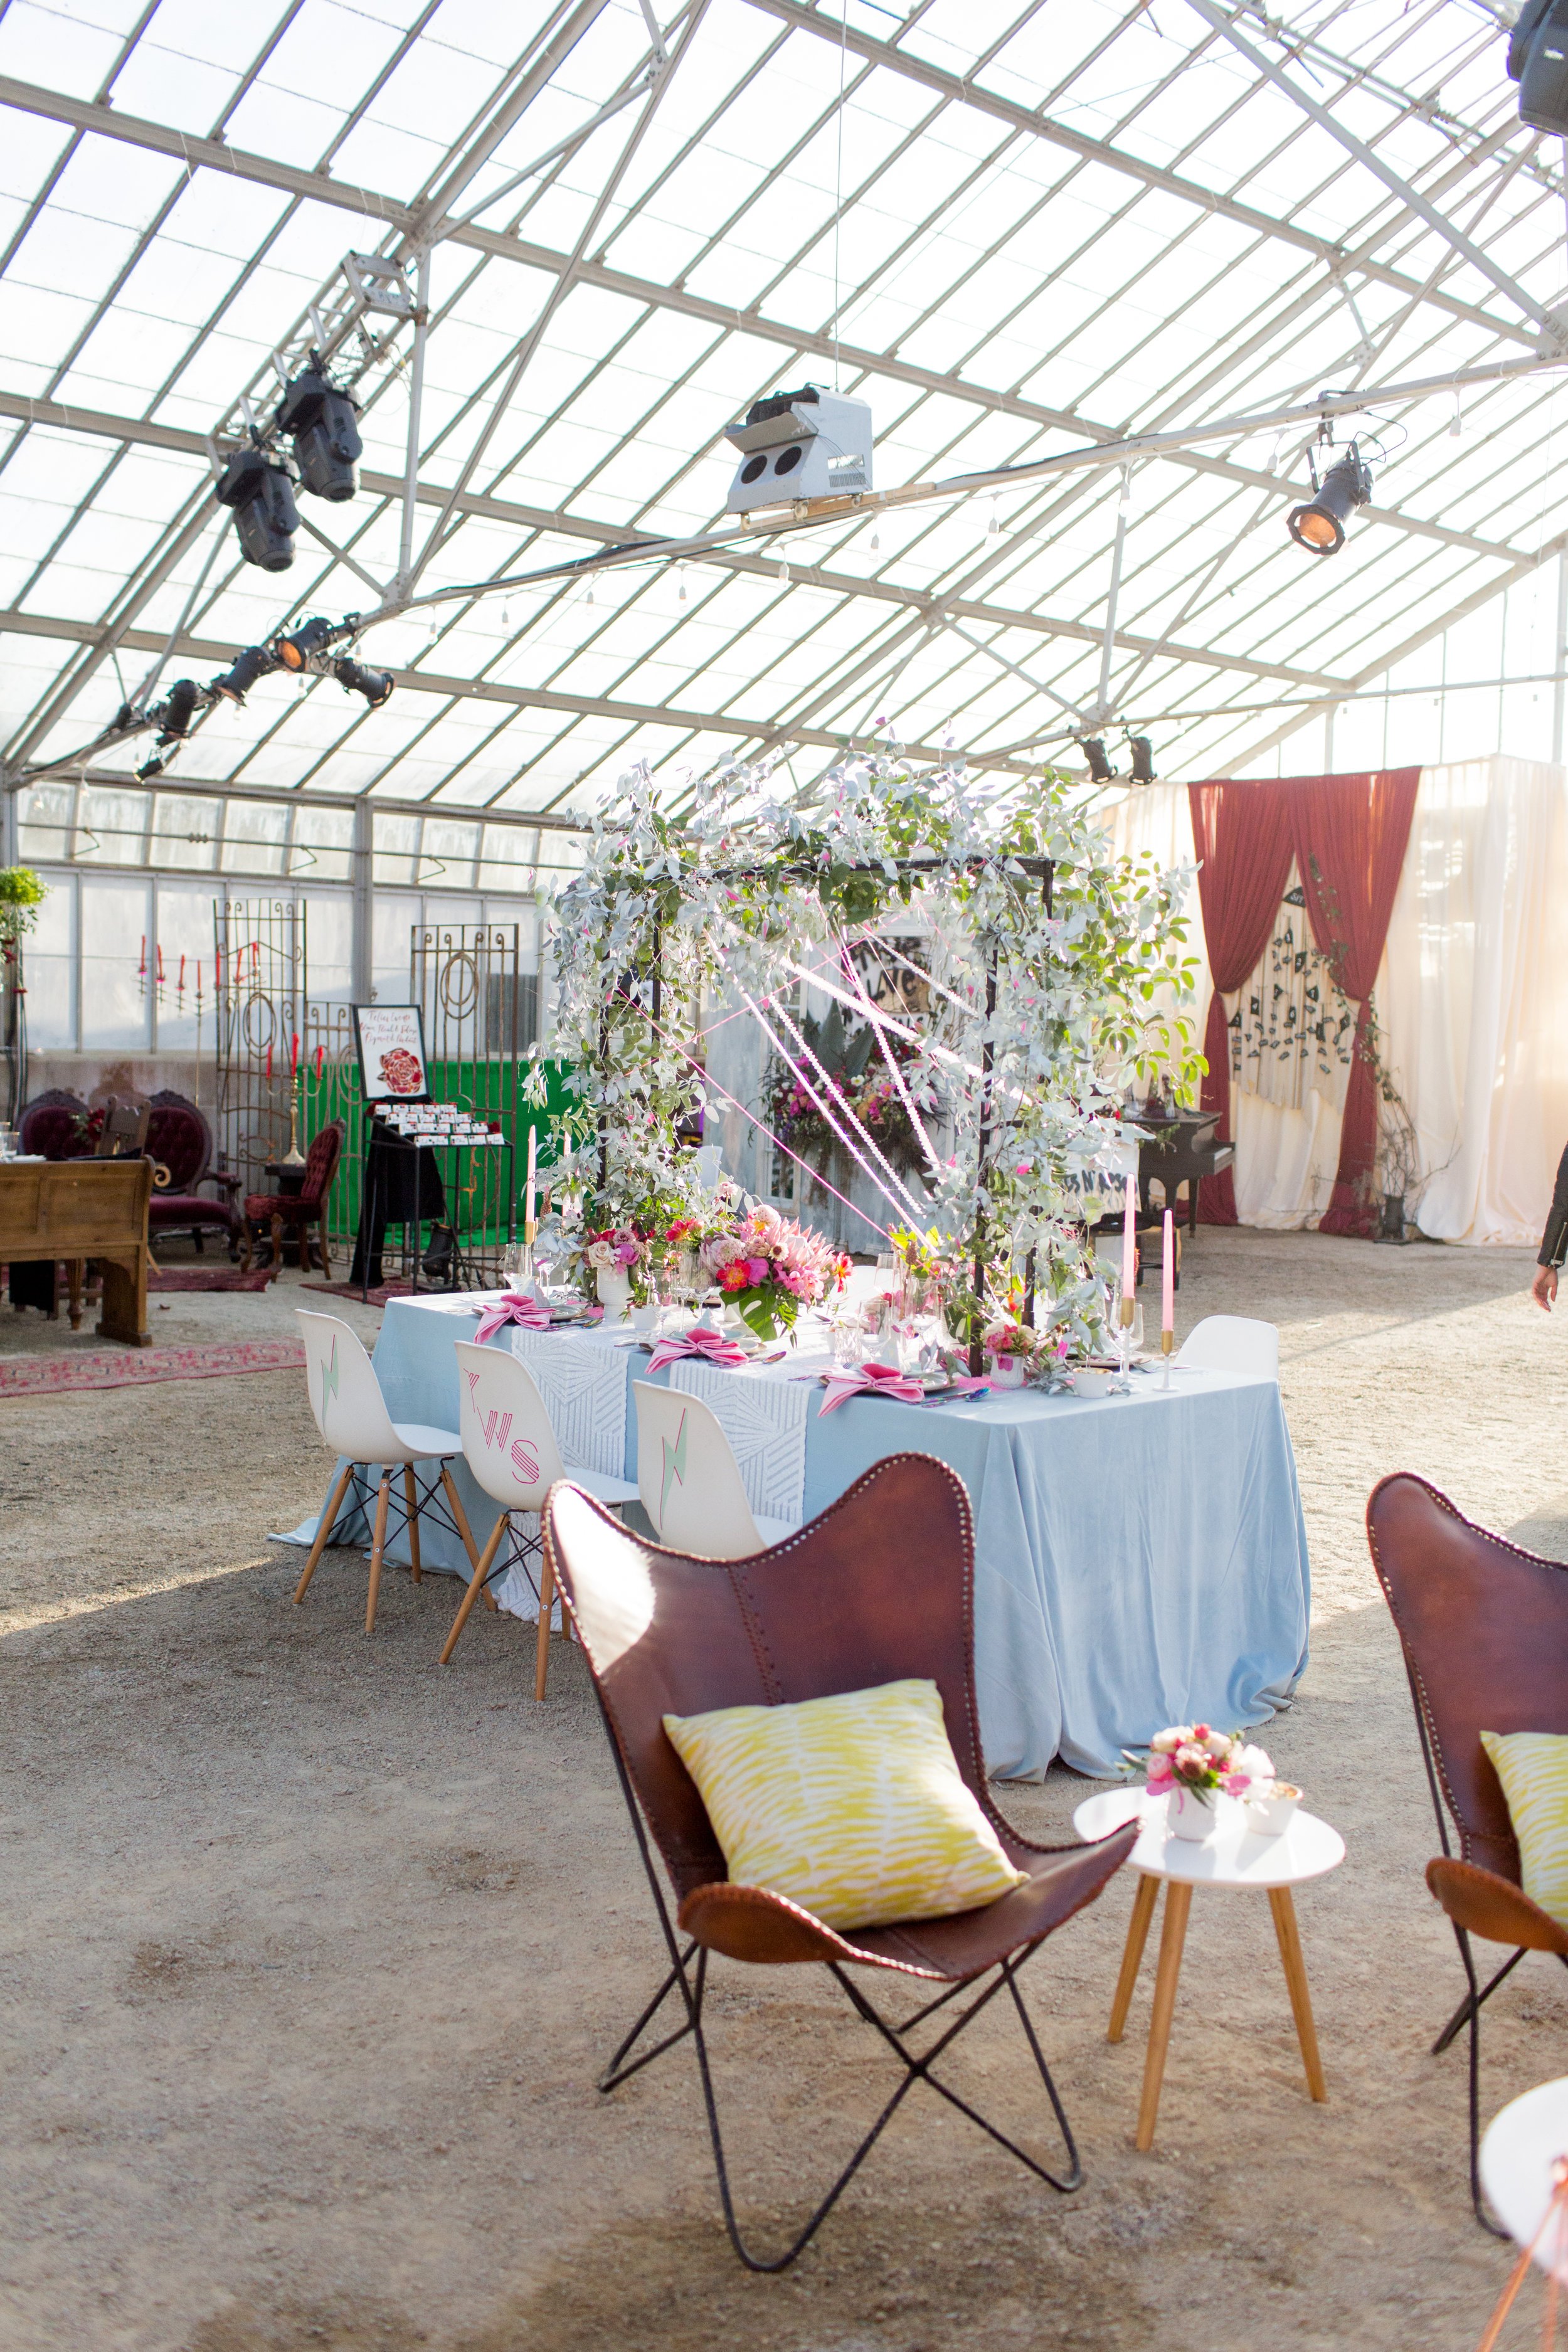 santabarbarawedding.com | The Jam Event | Orchid Farm | Party Pleasers